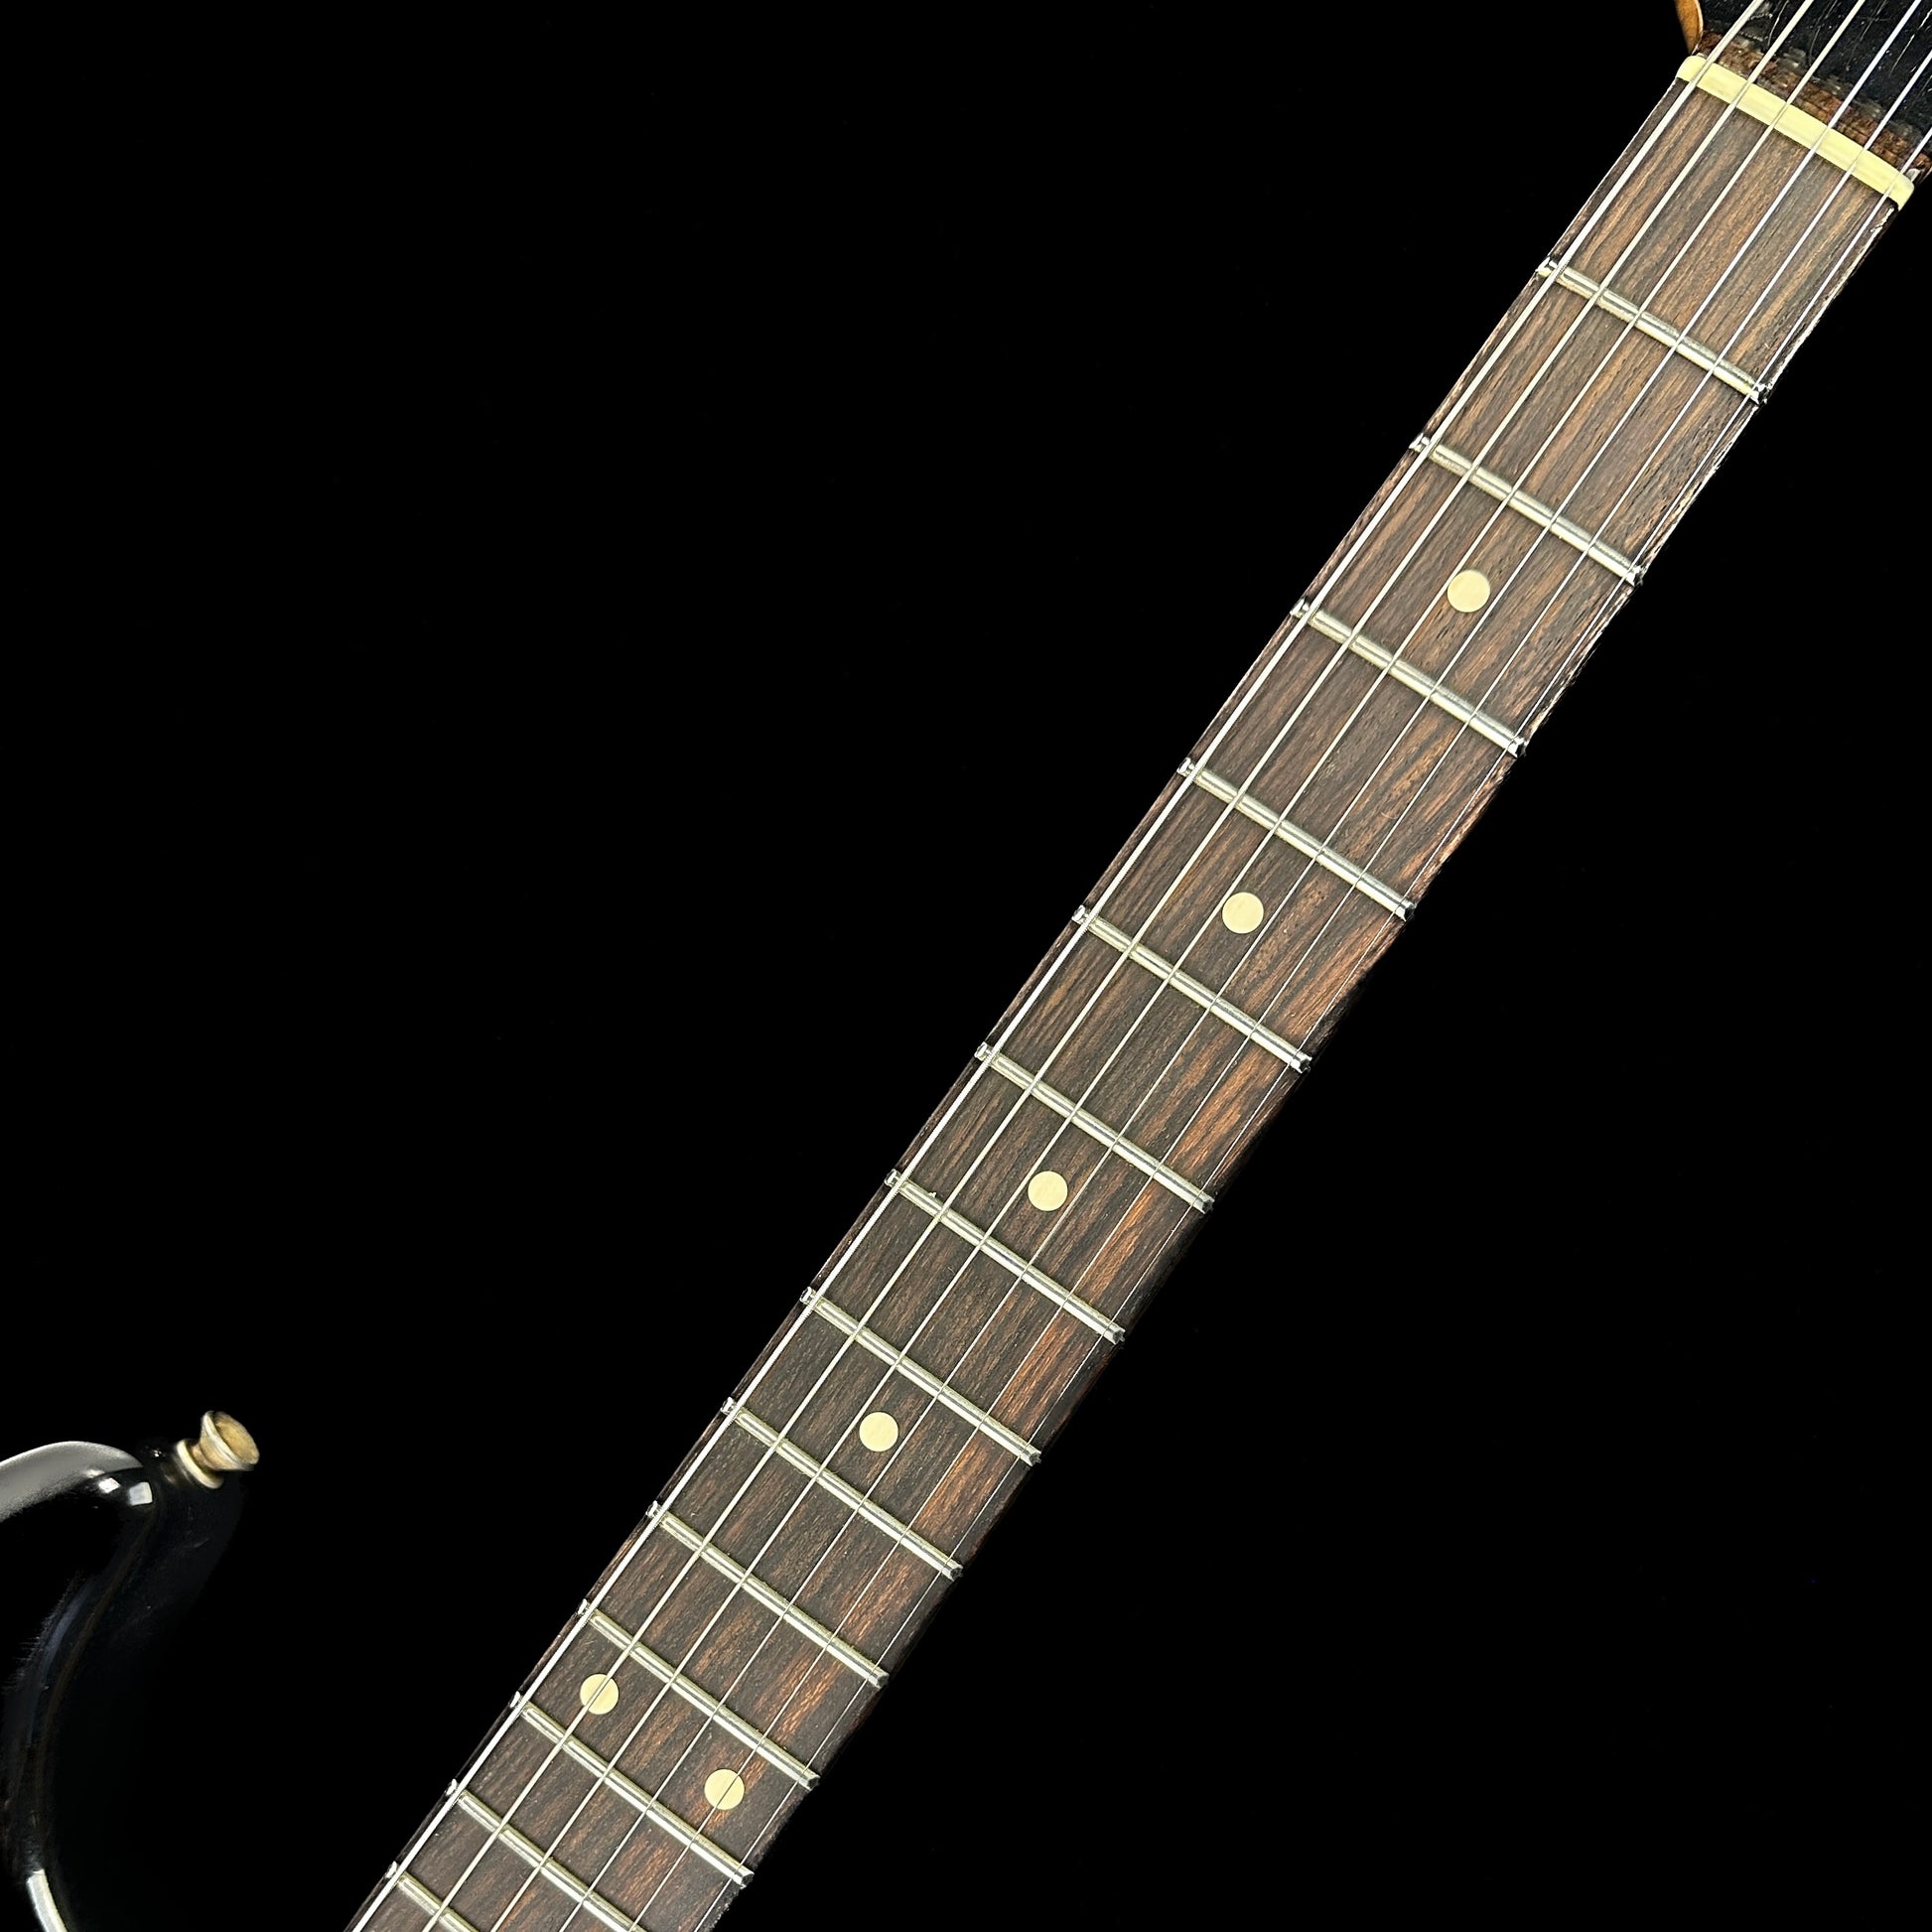 Fretboard of Used Fender Dual Mag Stratocaster.